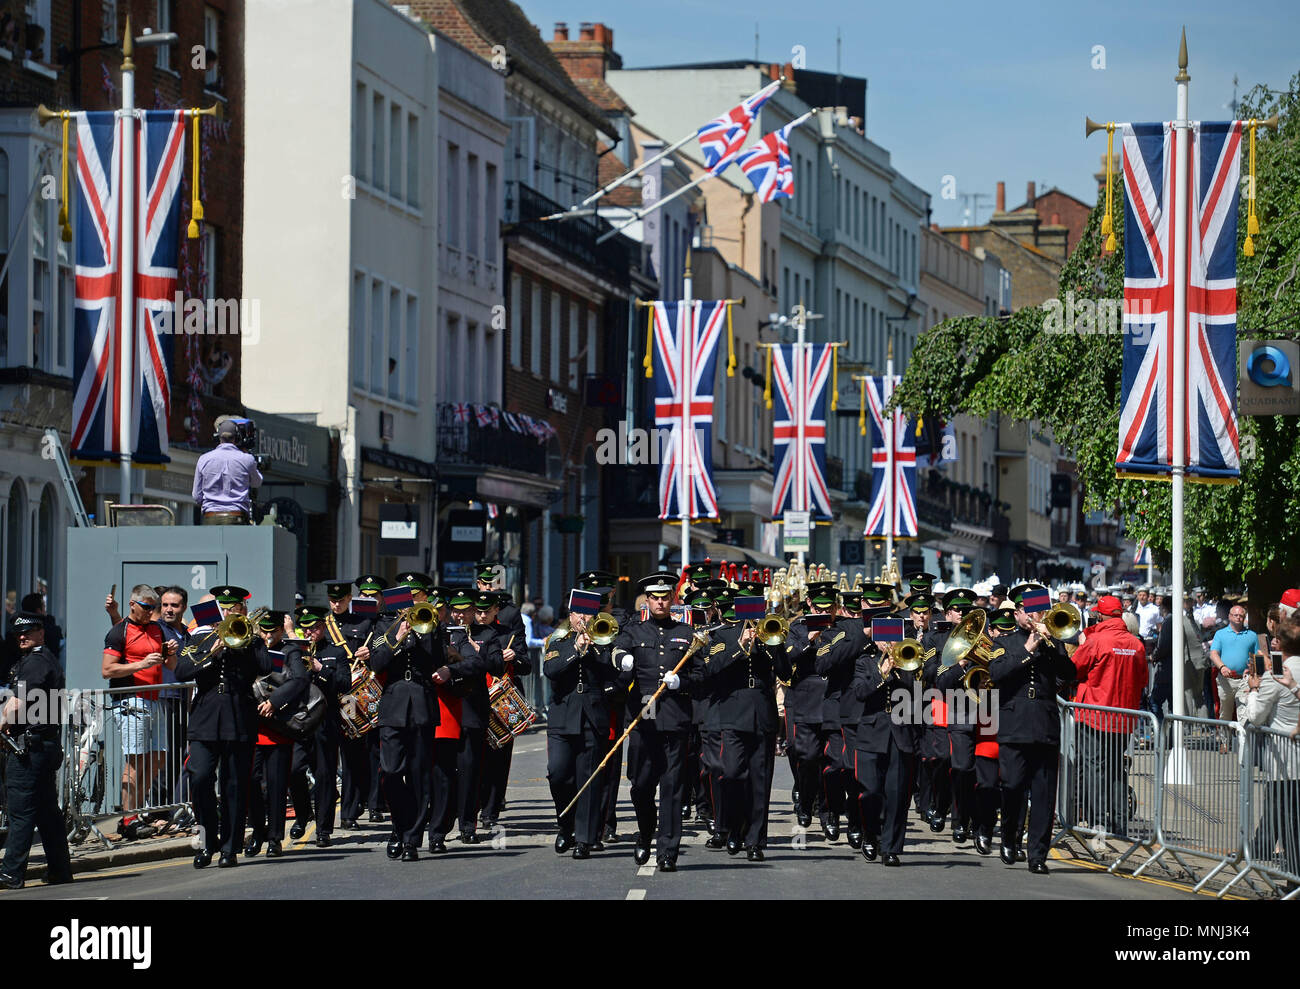 Members of the armed forces during a parade rehearsal in Windsor, Berkshire ahead of the wedding of Prince Harry and Meghan Markle this weekend. Stock Photo